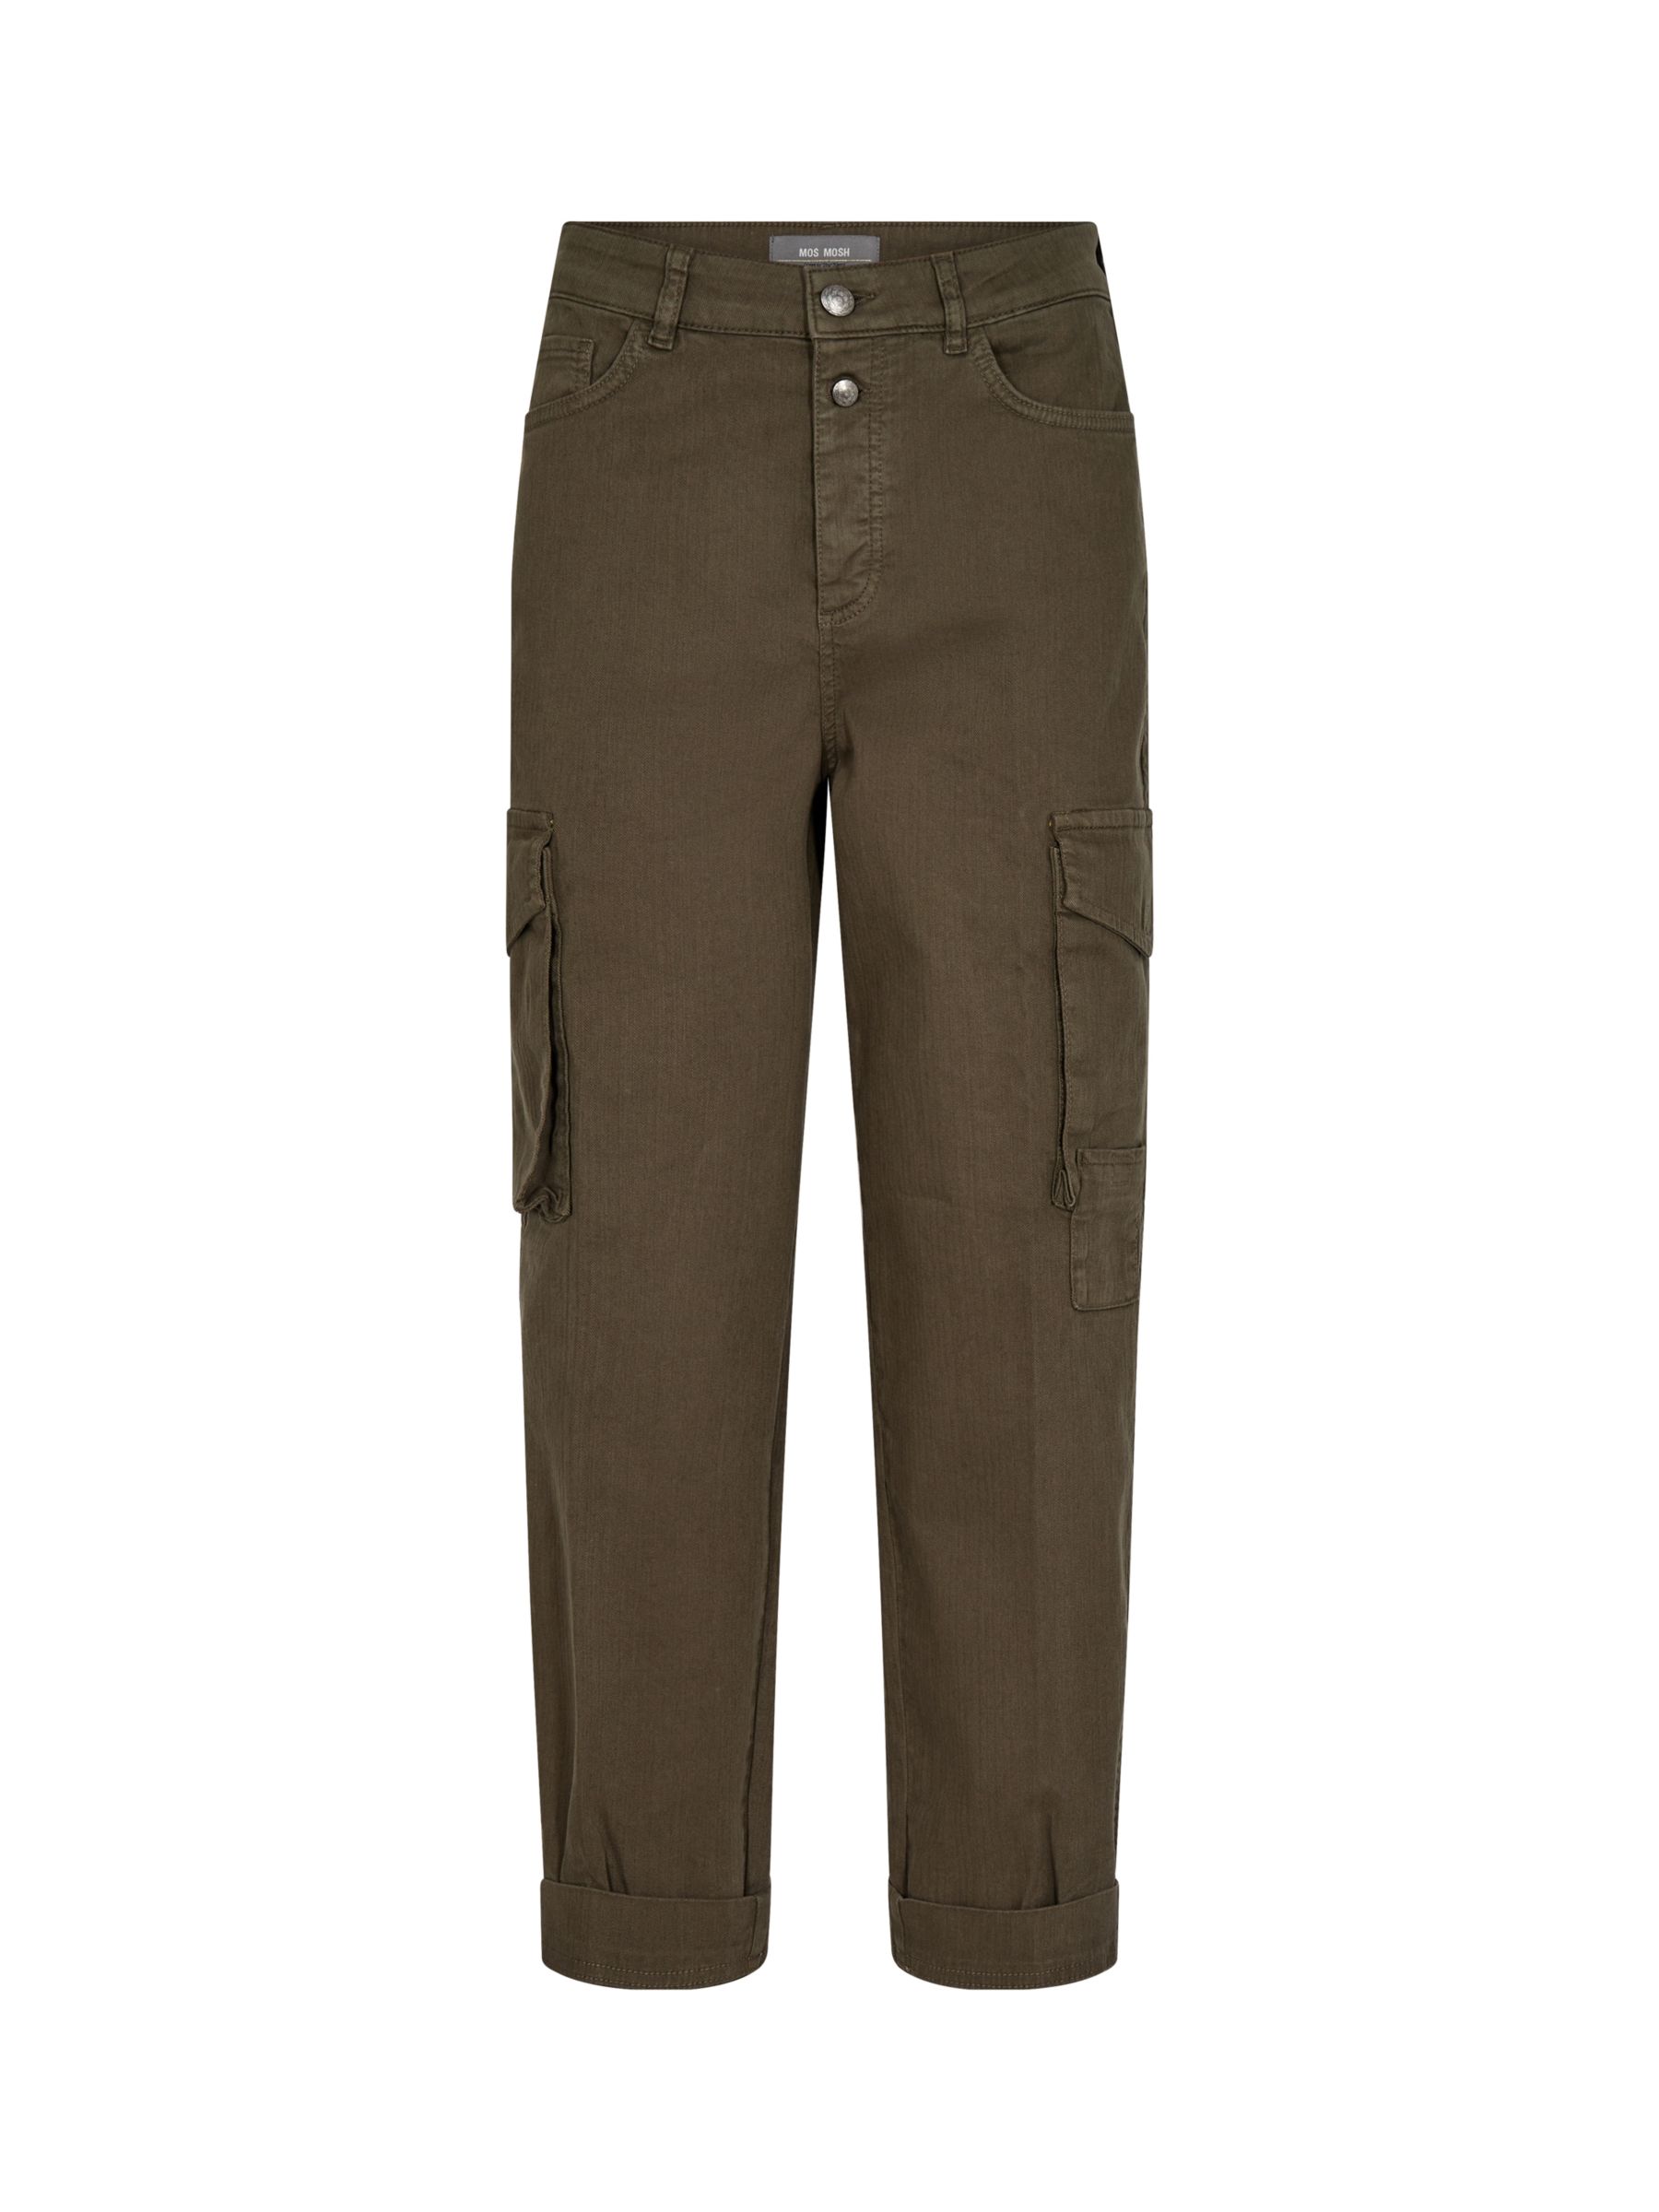 Buy MOS MOSH Adeline Cargo Trouser, Forest Night Online at johnlewis.com